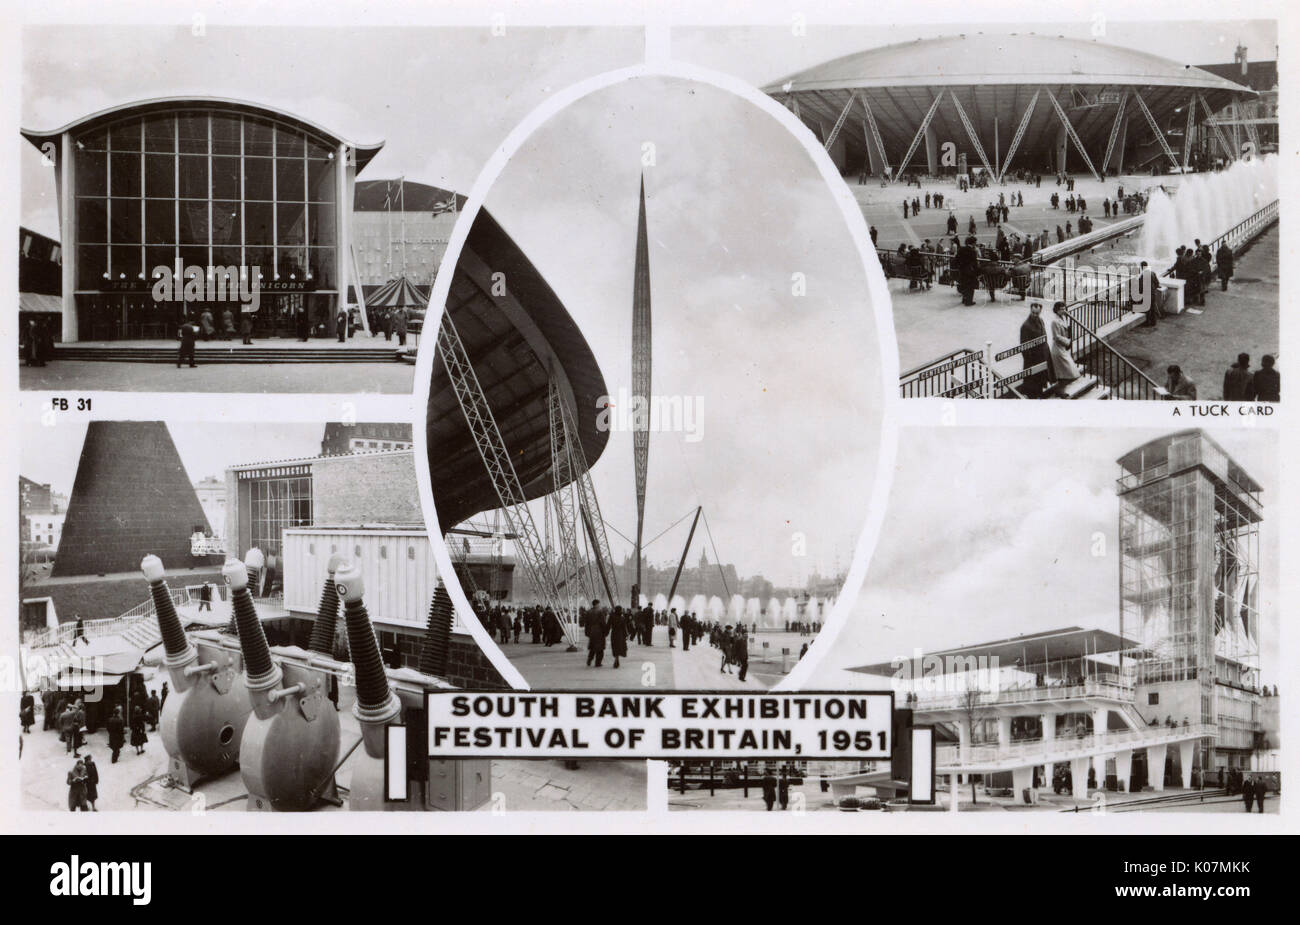 Seaside South Bank Exhibition Festival of Britain 1951 Postcard 749a 